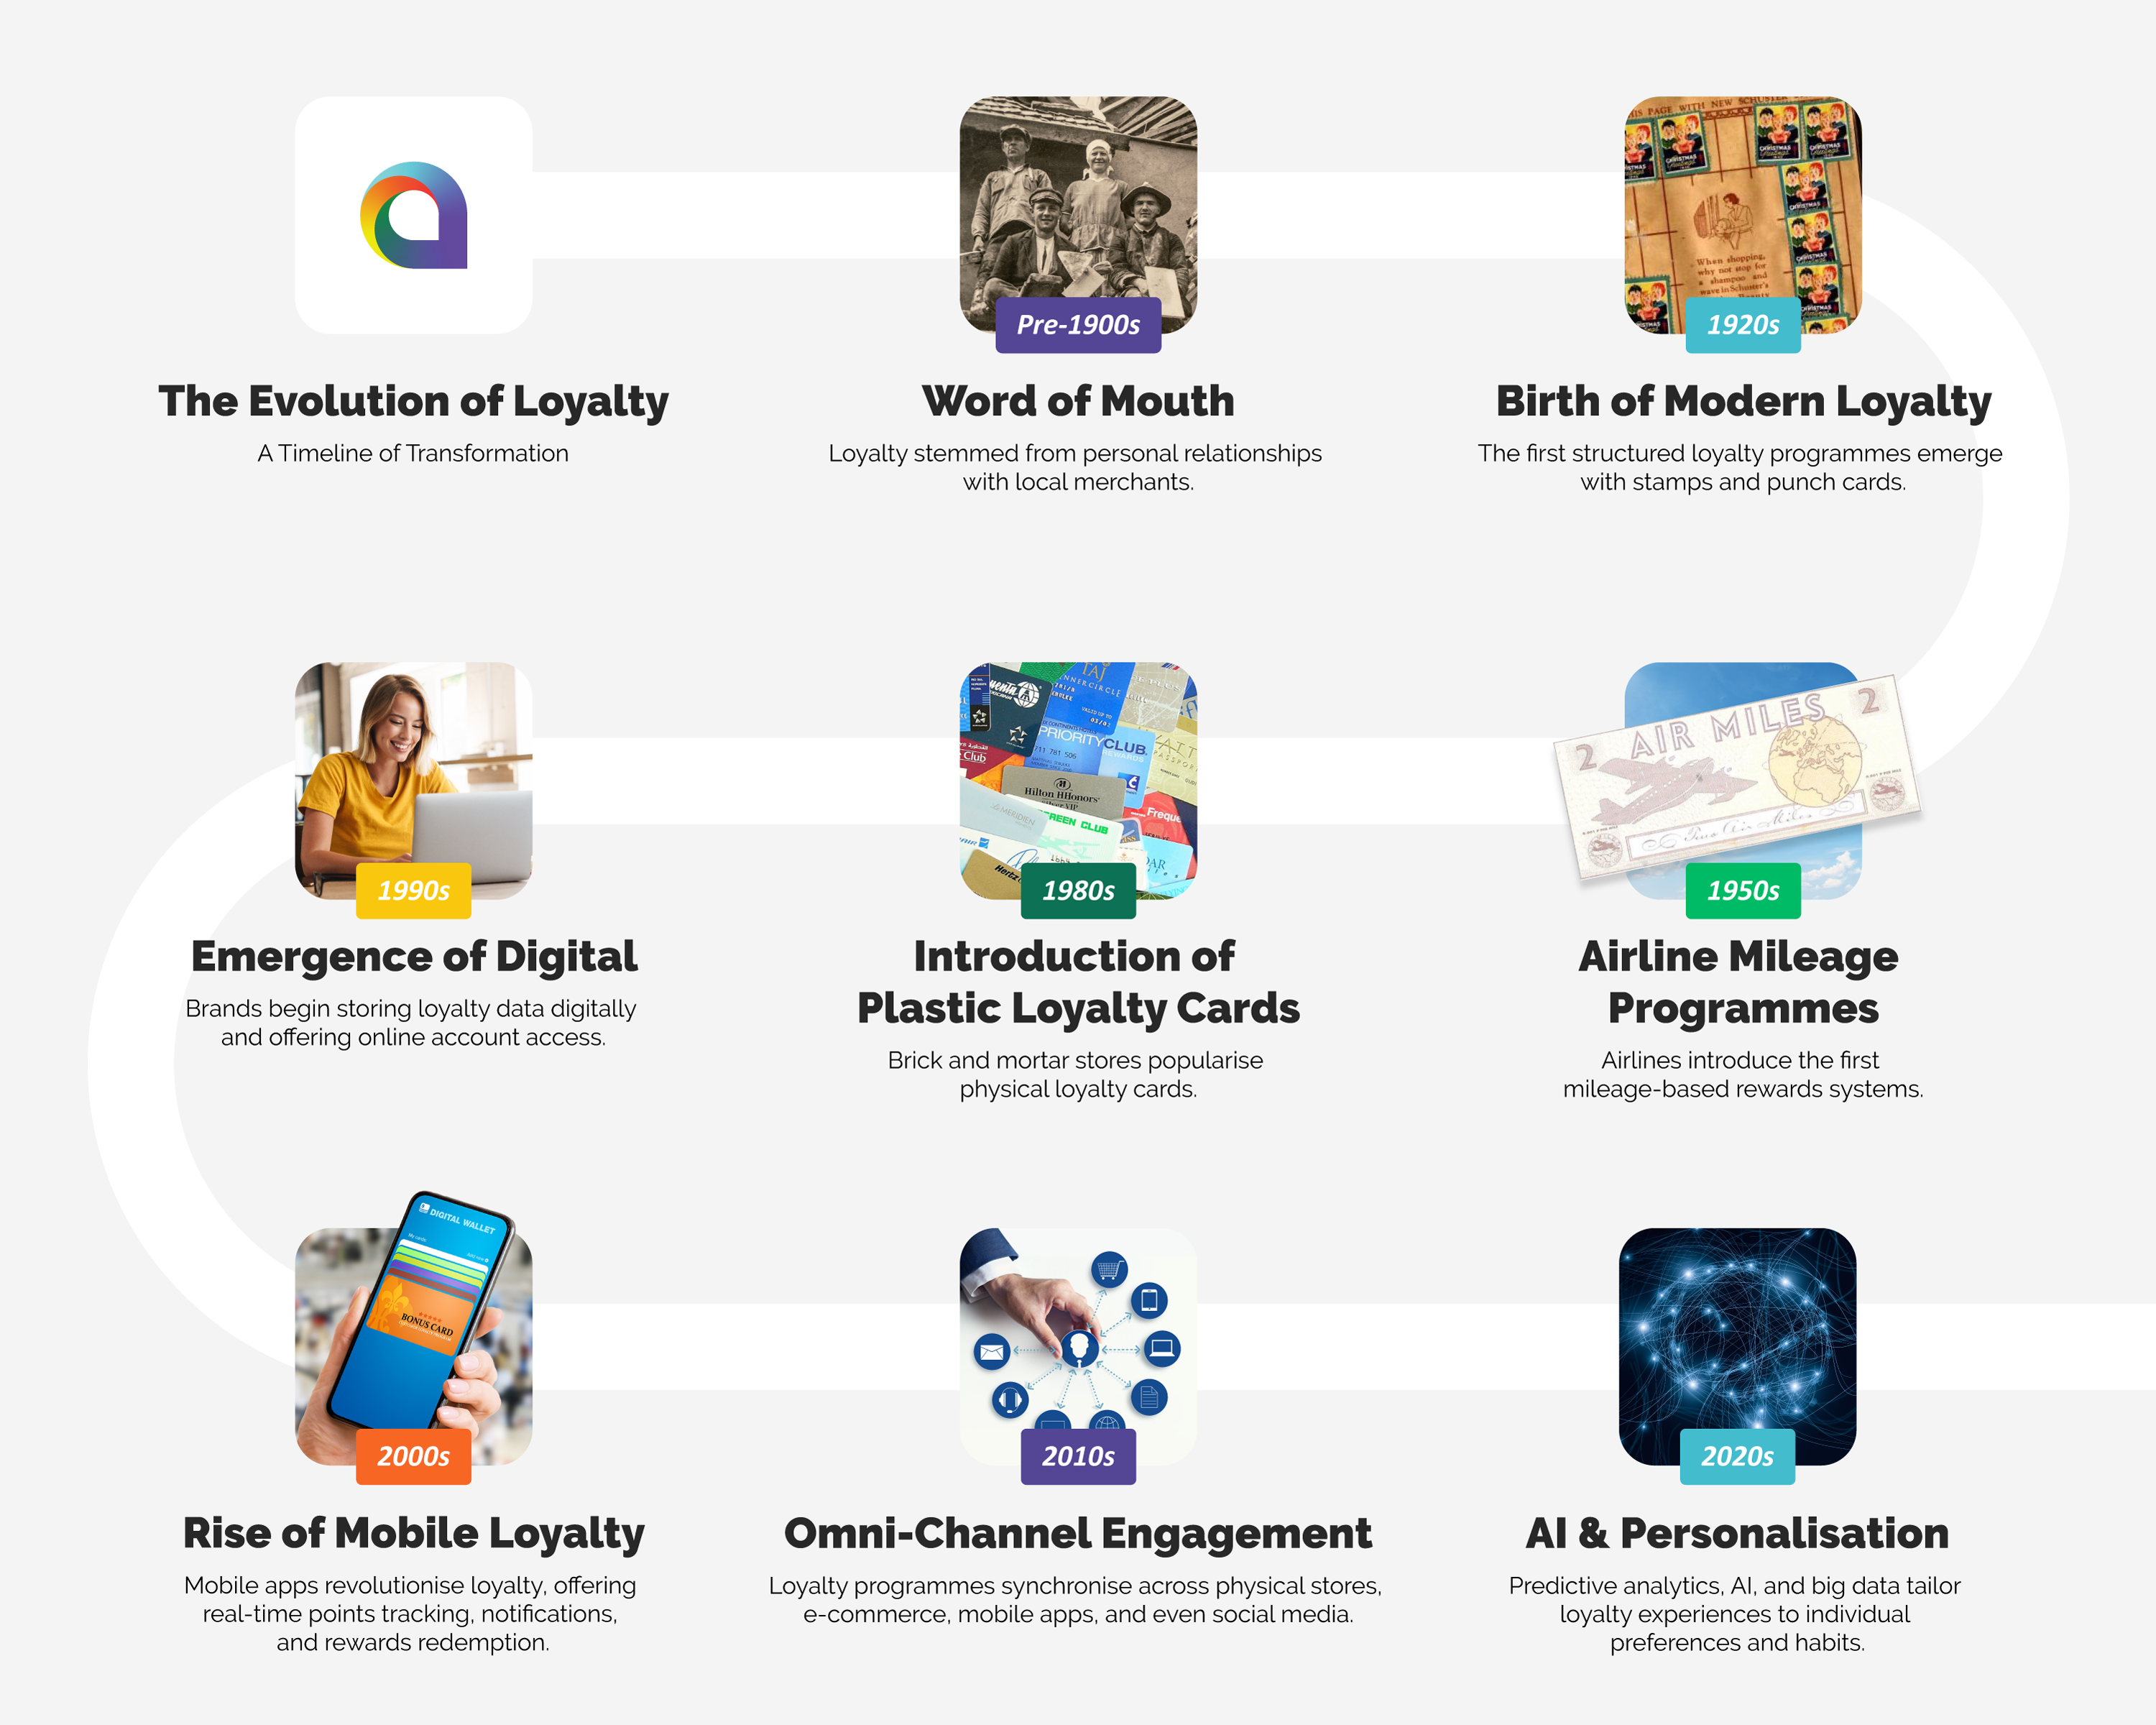 The Evolution of Loyalty - A Timeline of Transformation